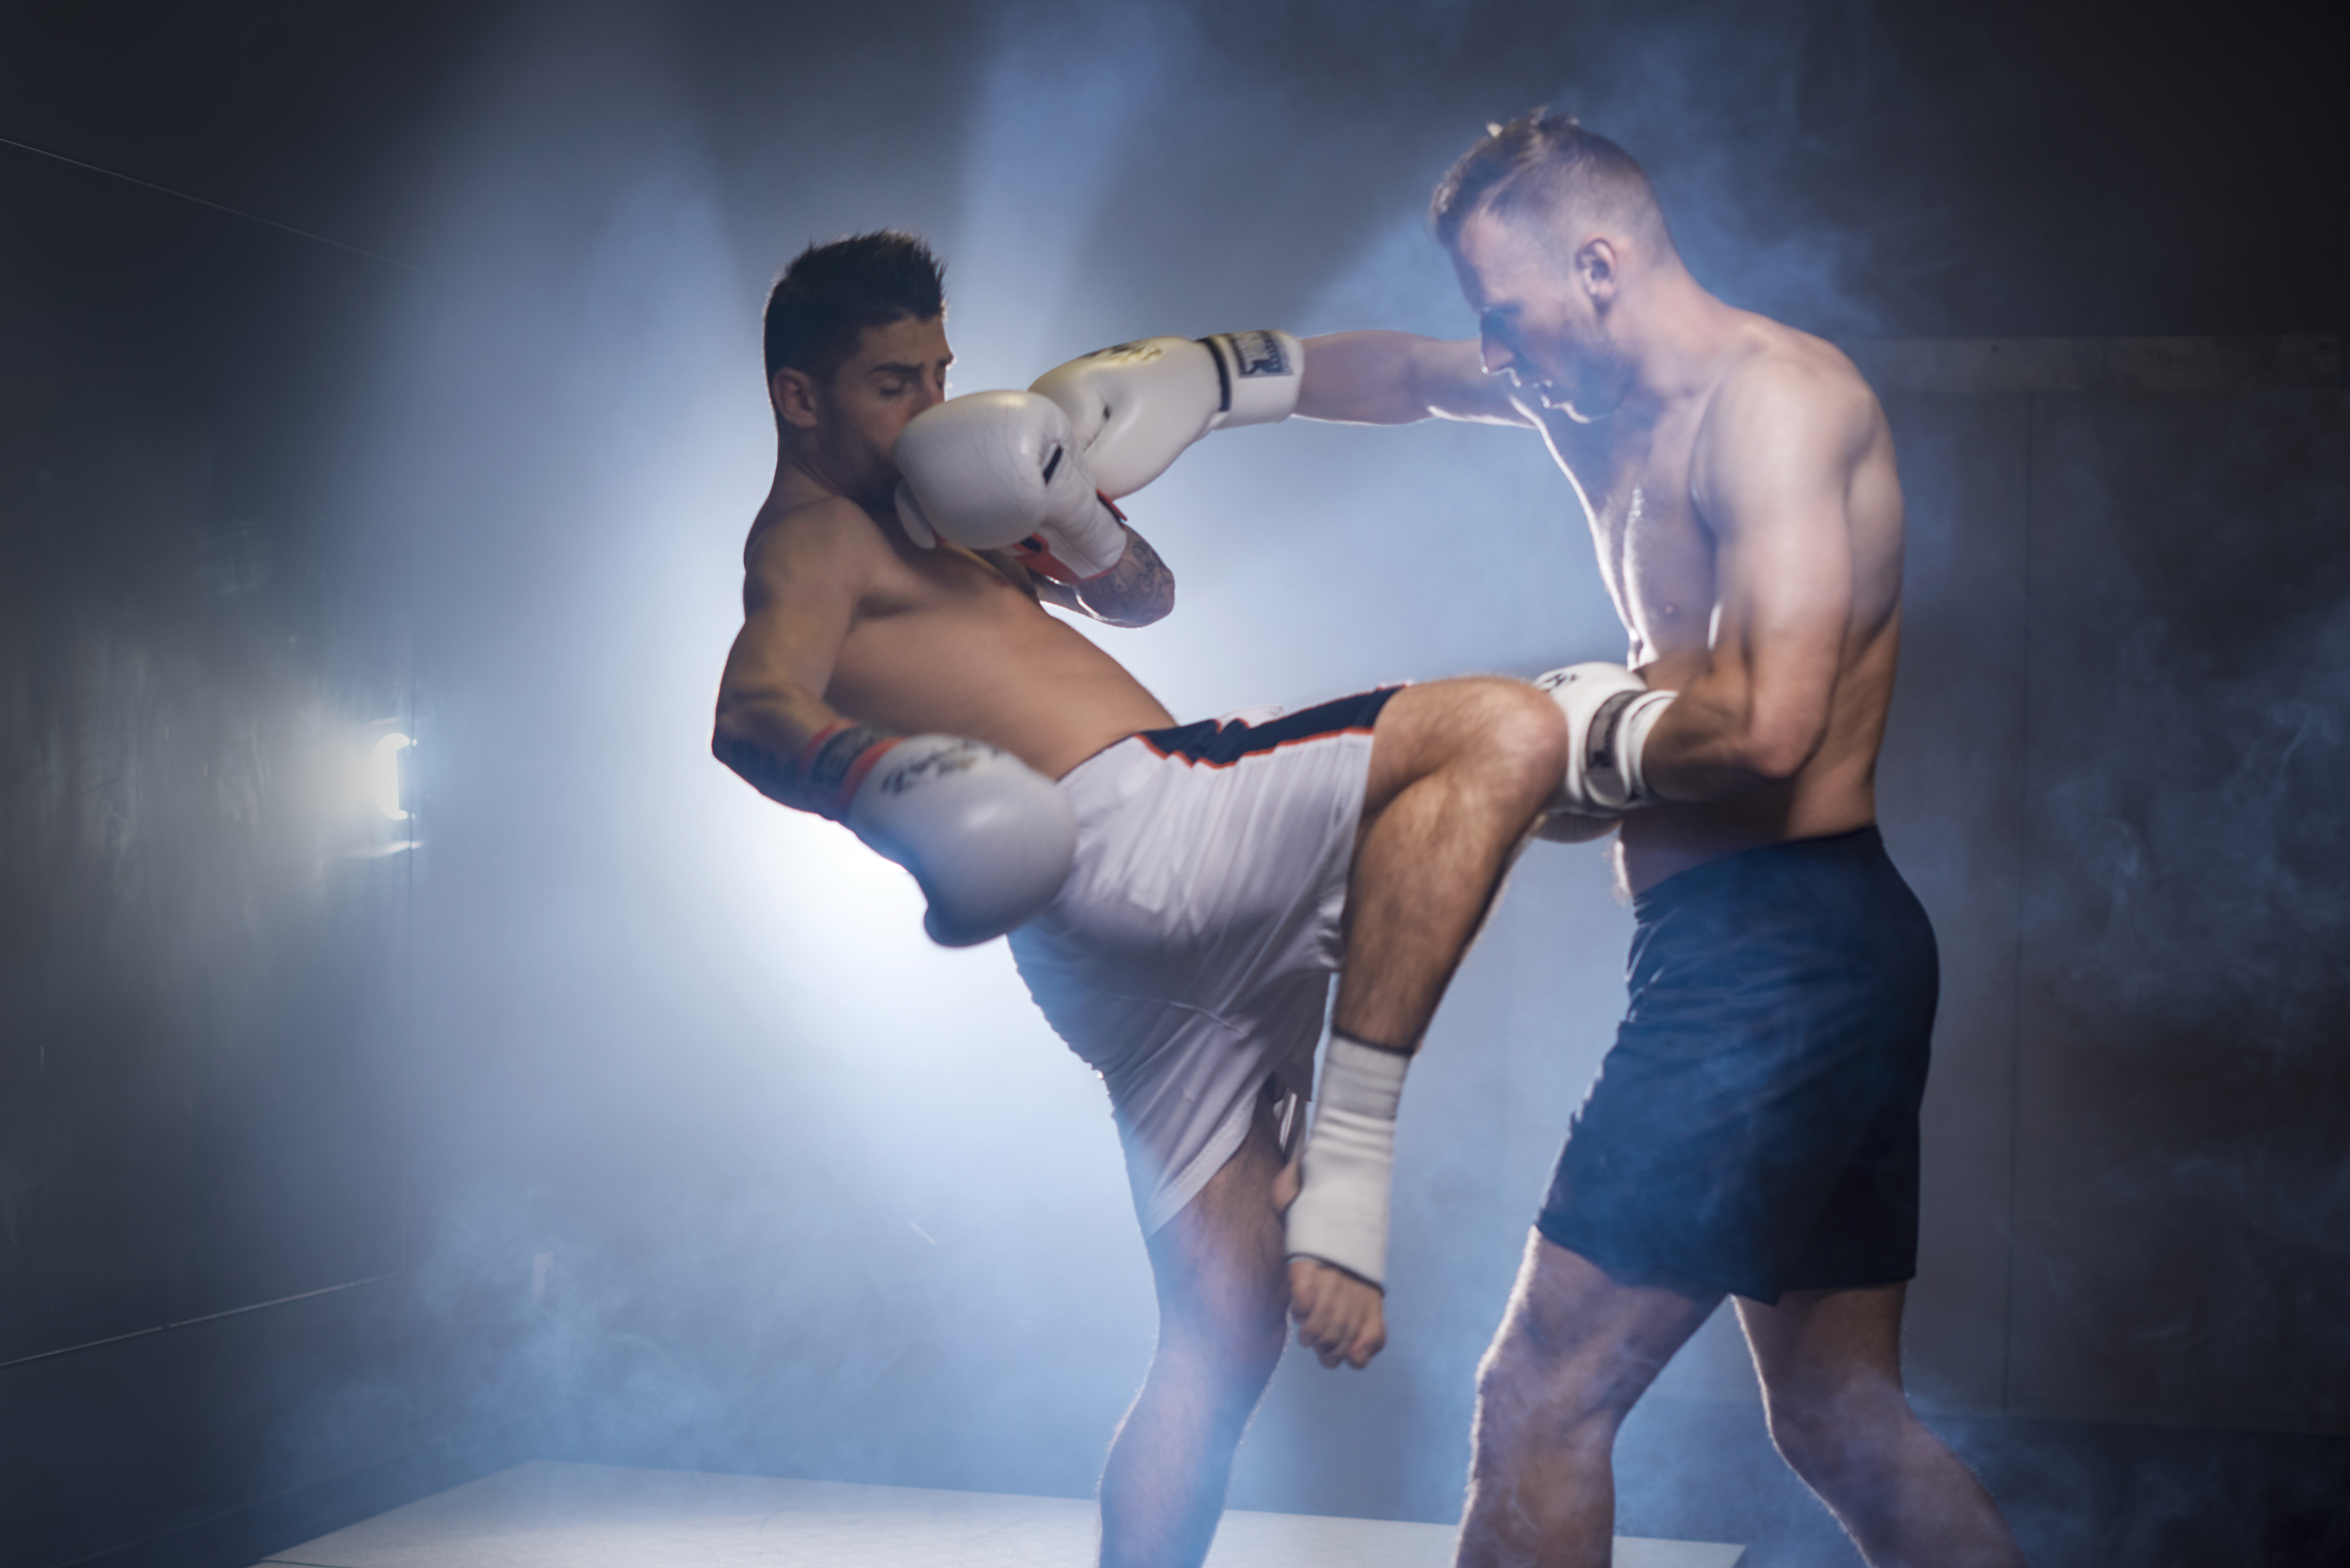 Boxing or Kickboxing for Self Defense?